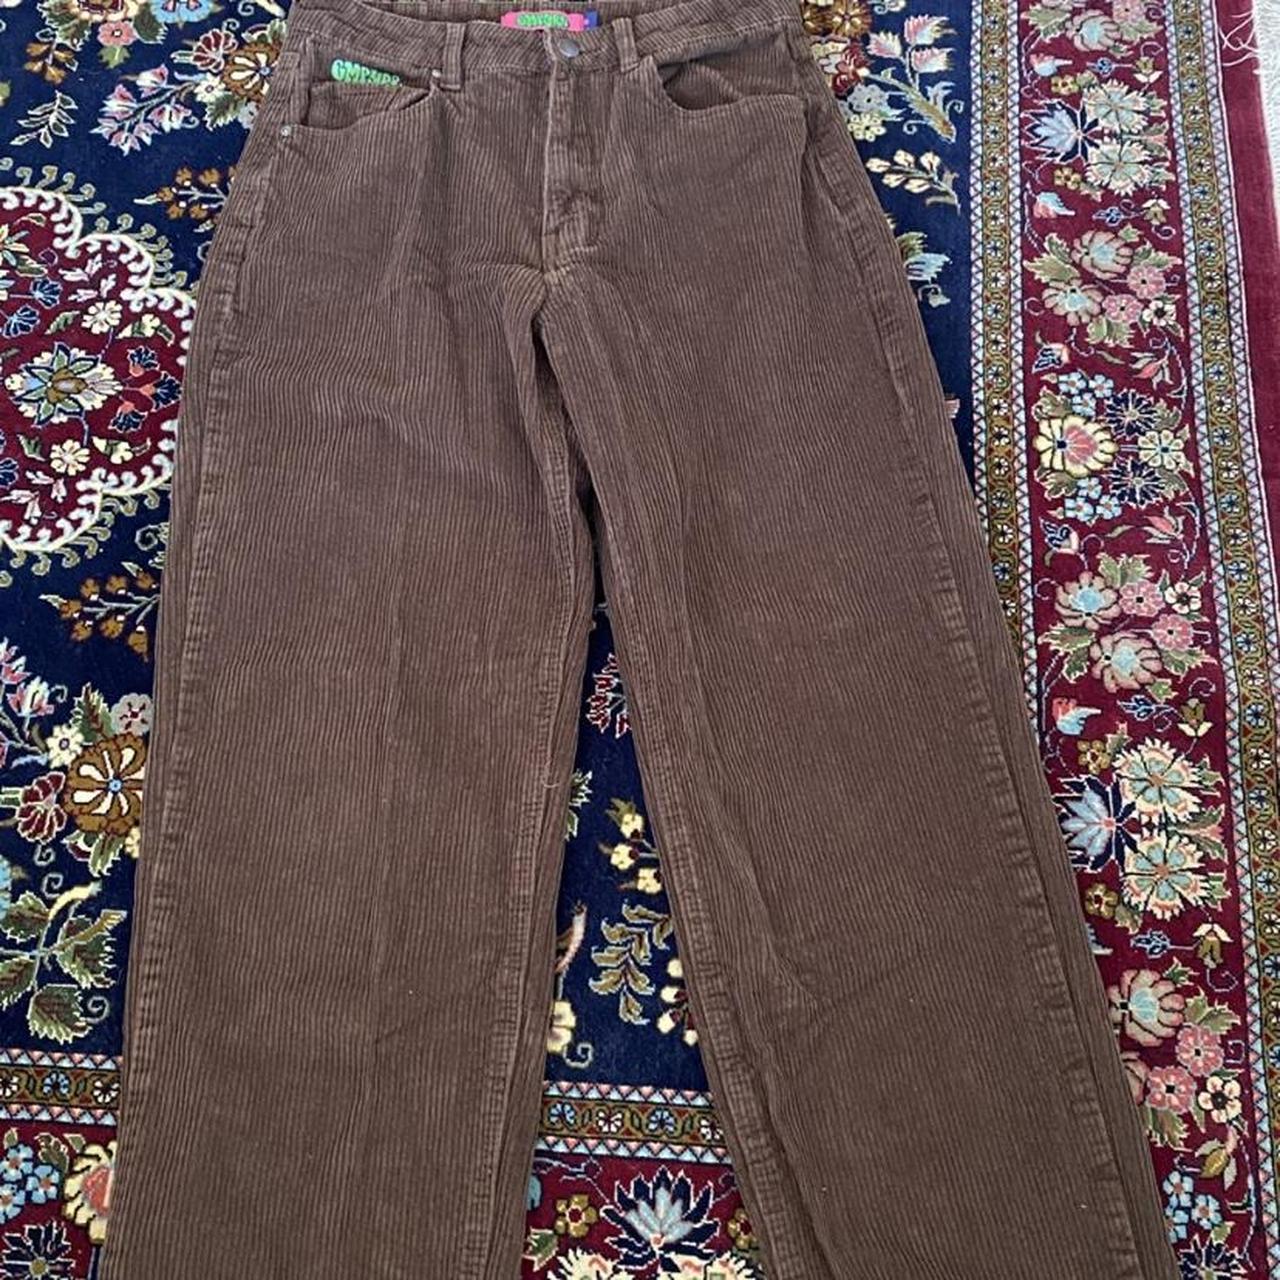 Brown Corduroy Empyre pants cut at the bottom Tag... - Depop